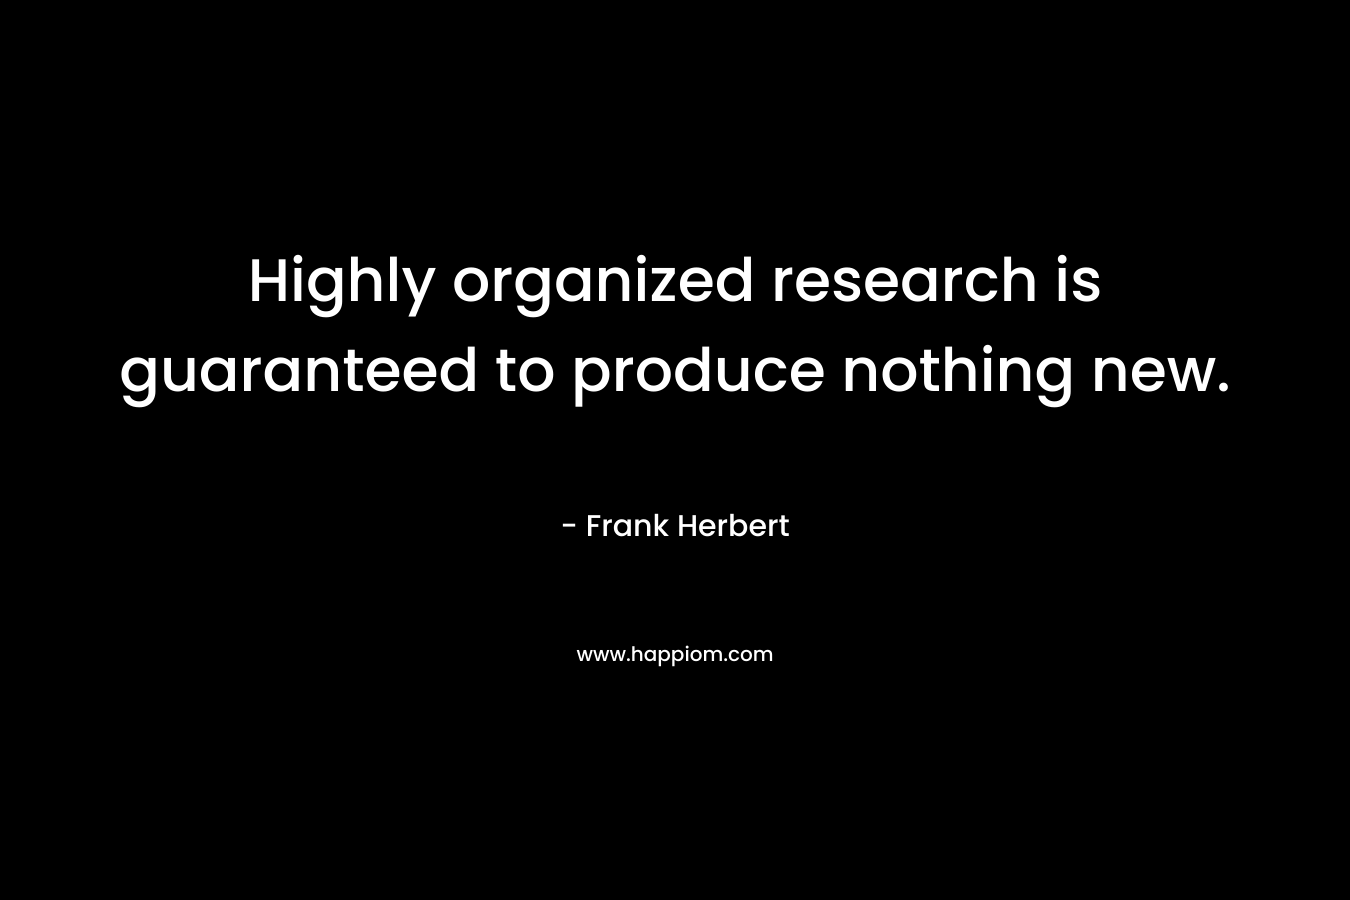 Highly organized research is guaranteed to produce nothing new.